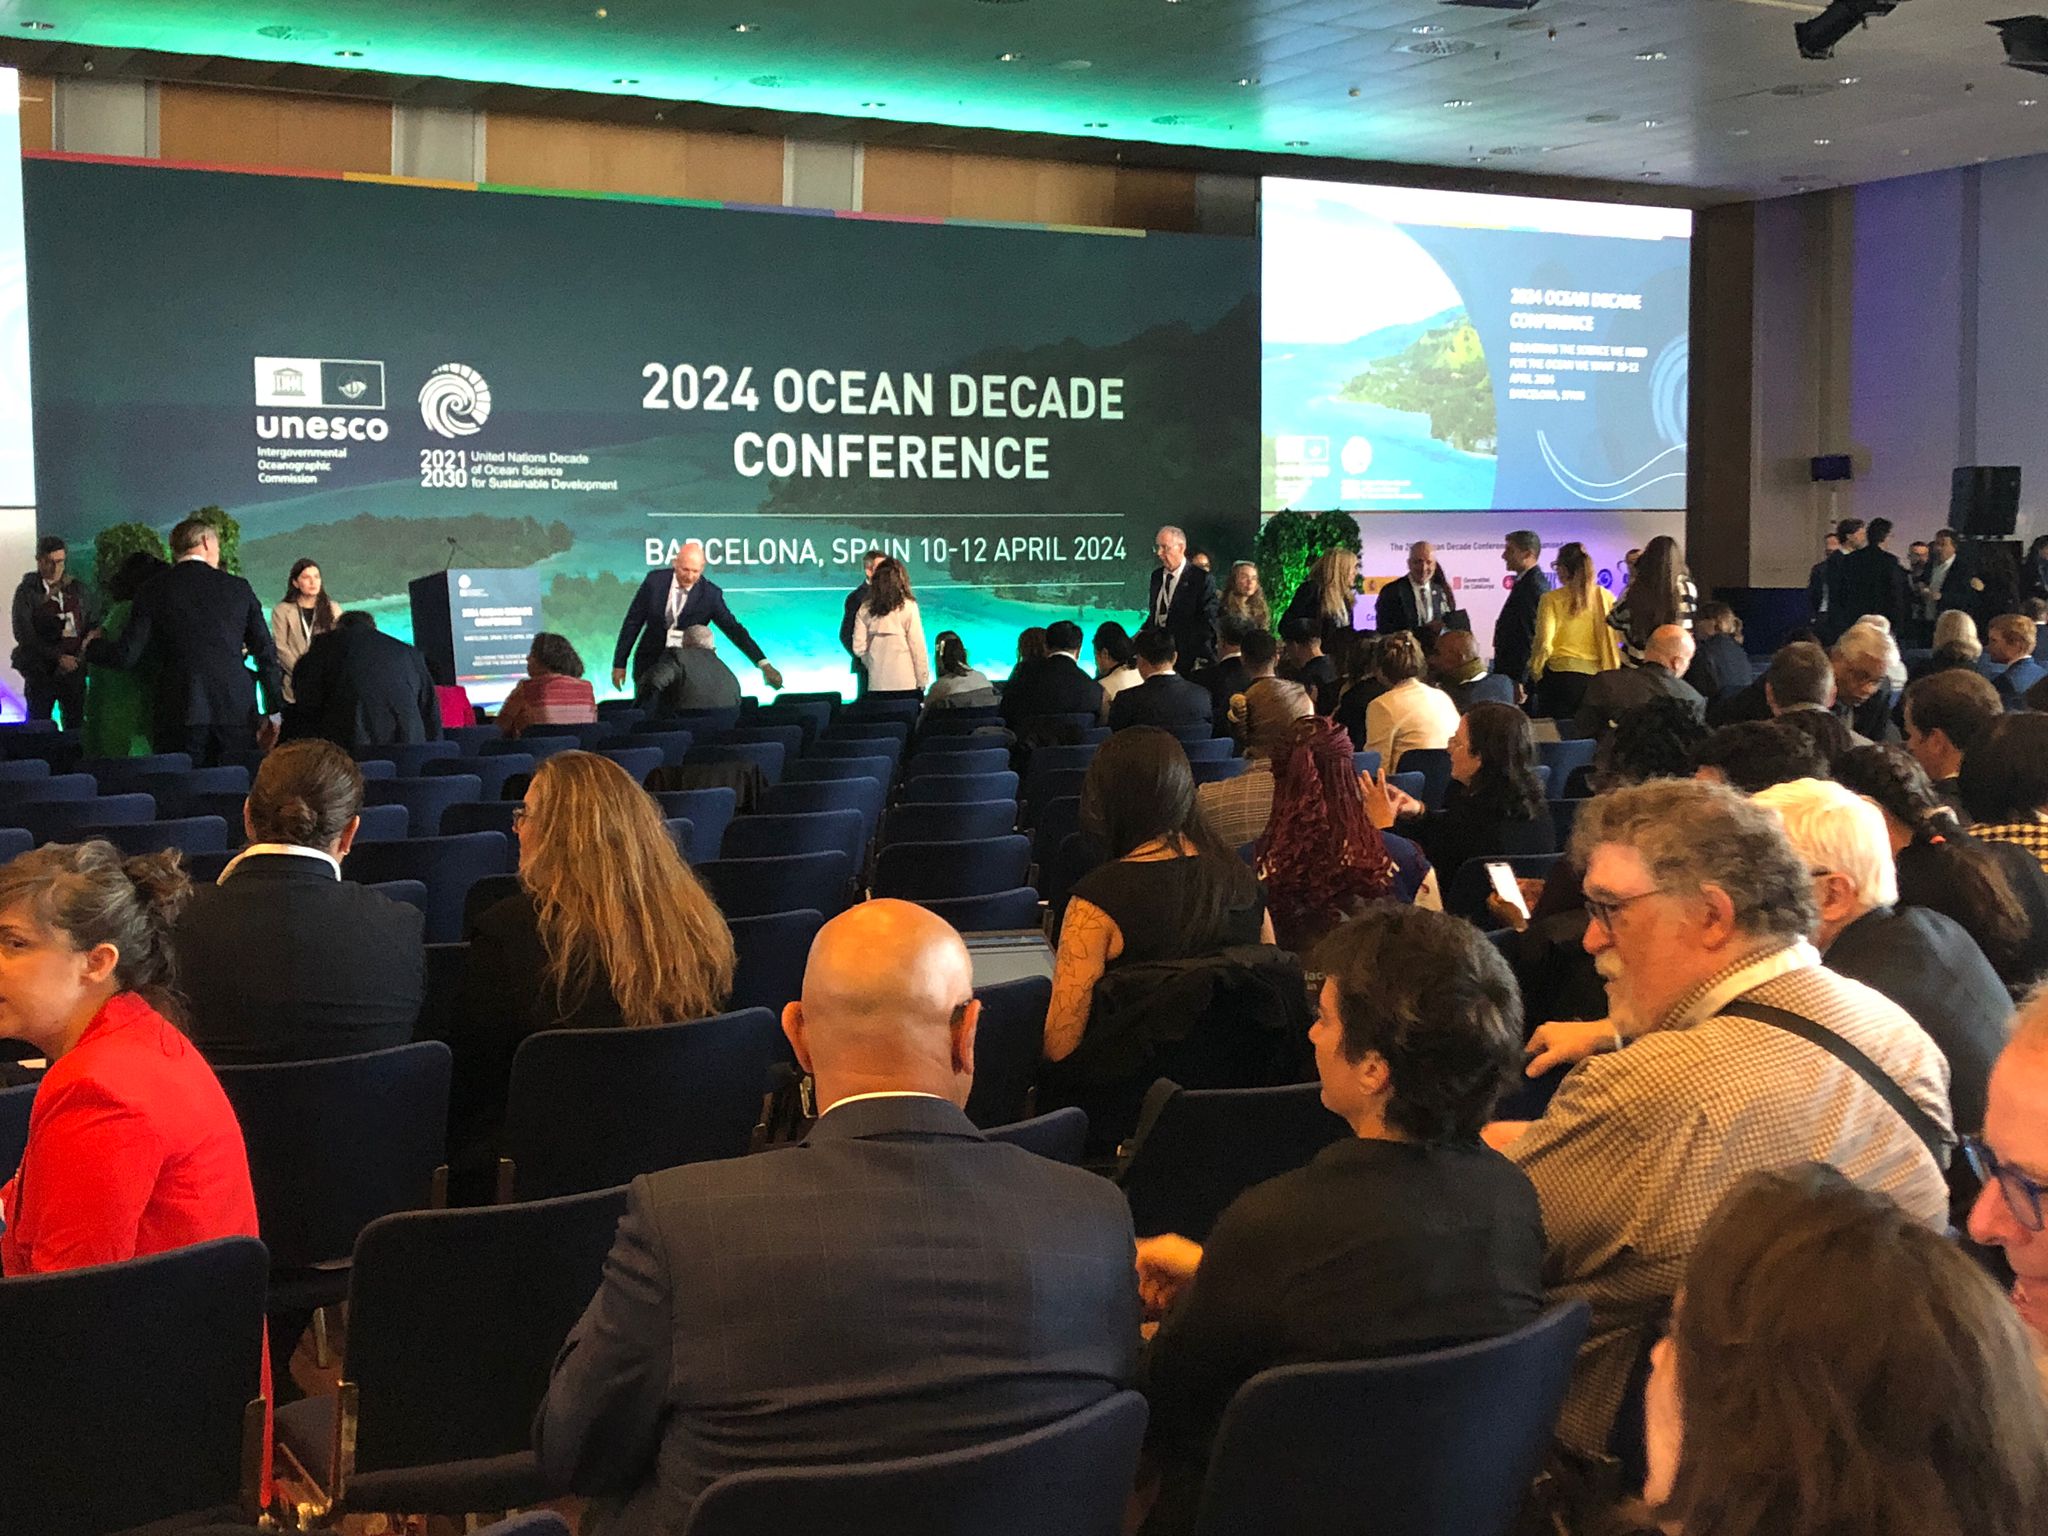 OCEAN CITIZEN at the Ocean Decade Conference in Barcelona: Promoting Collaboration and Engagement